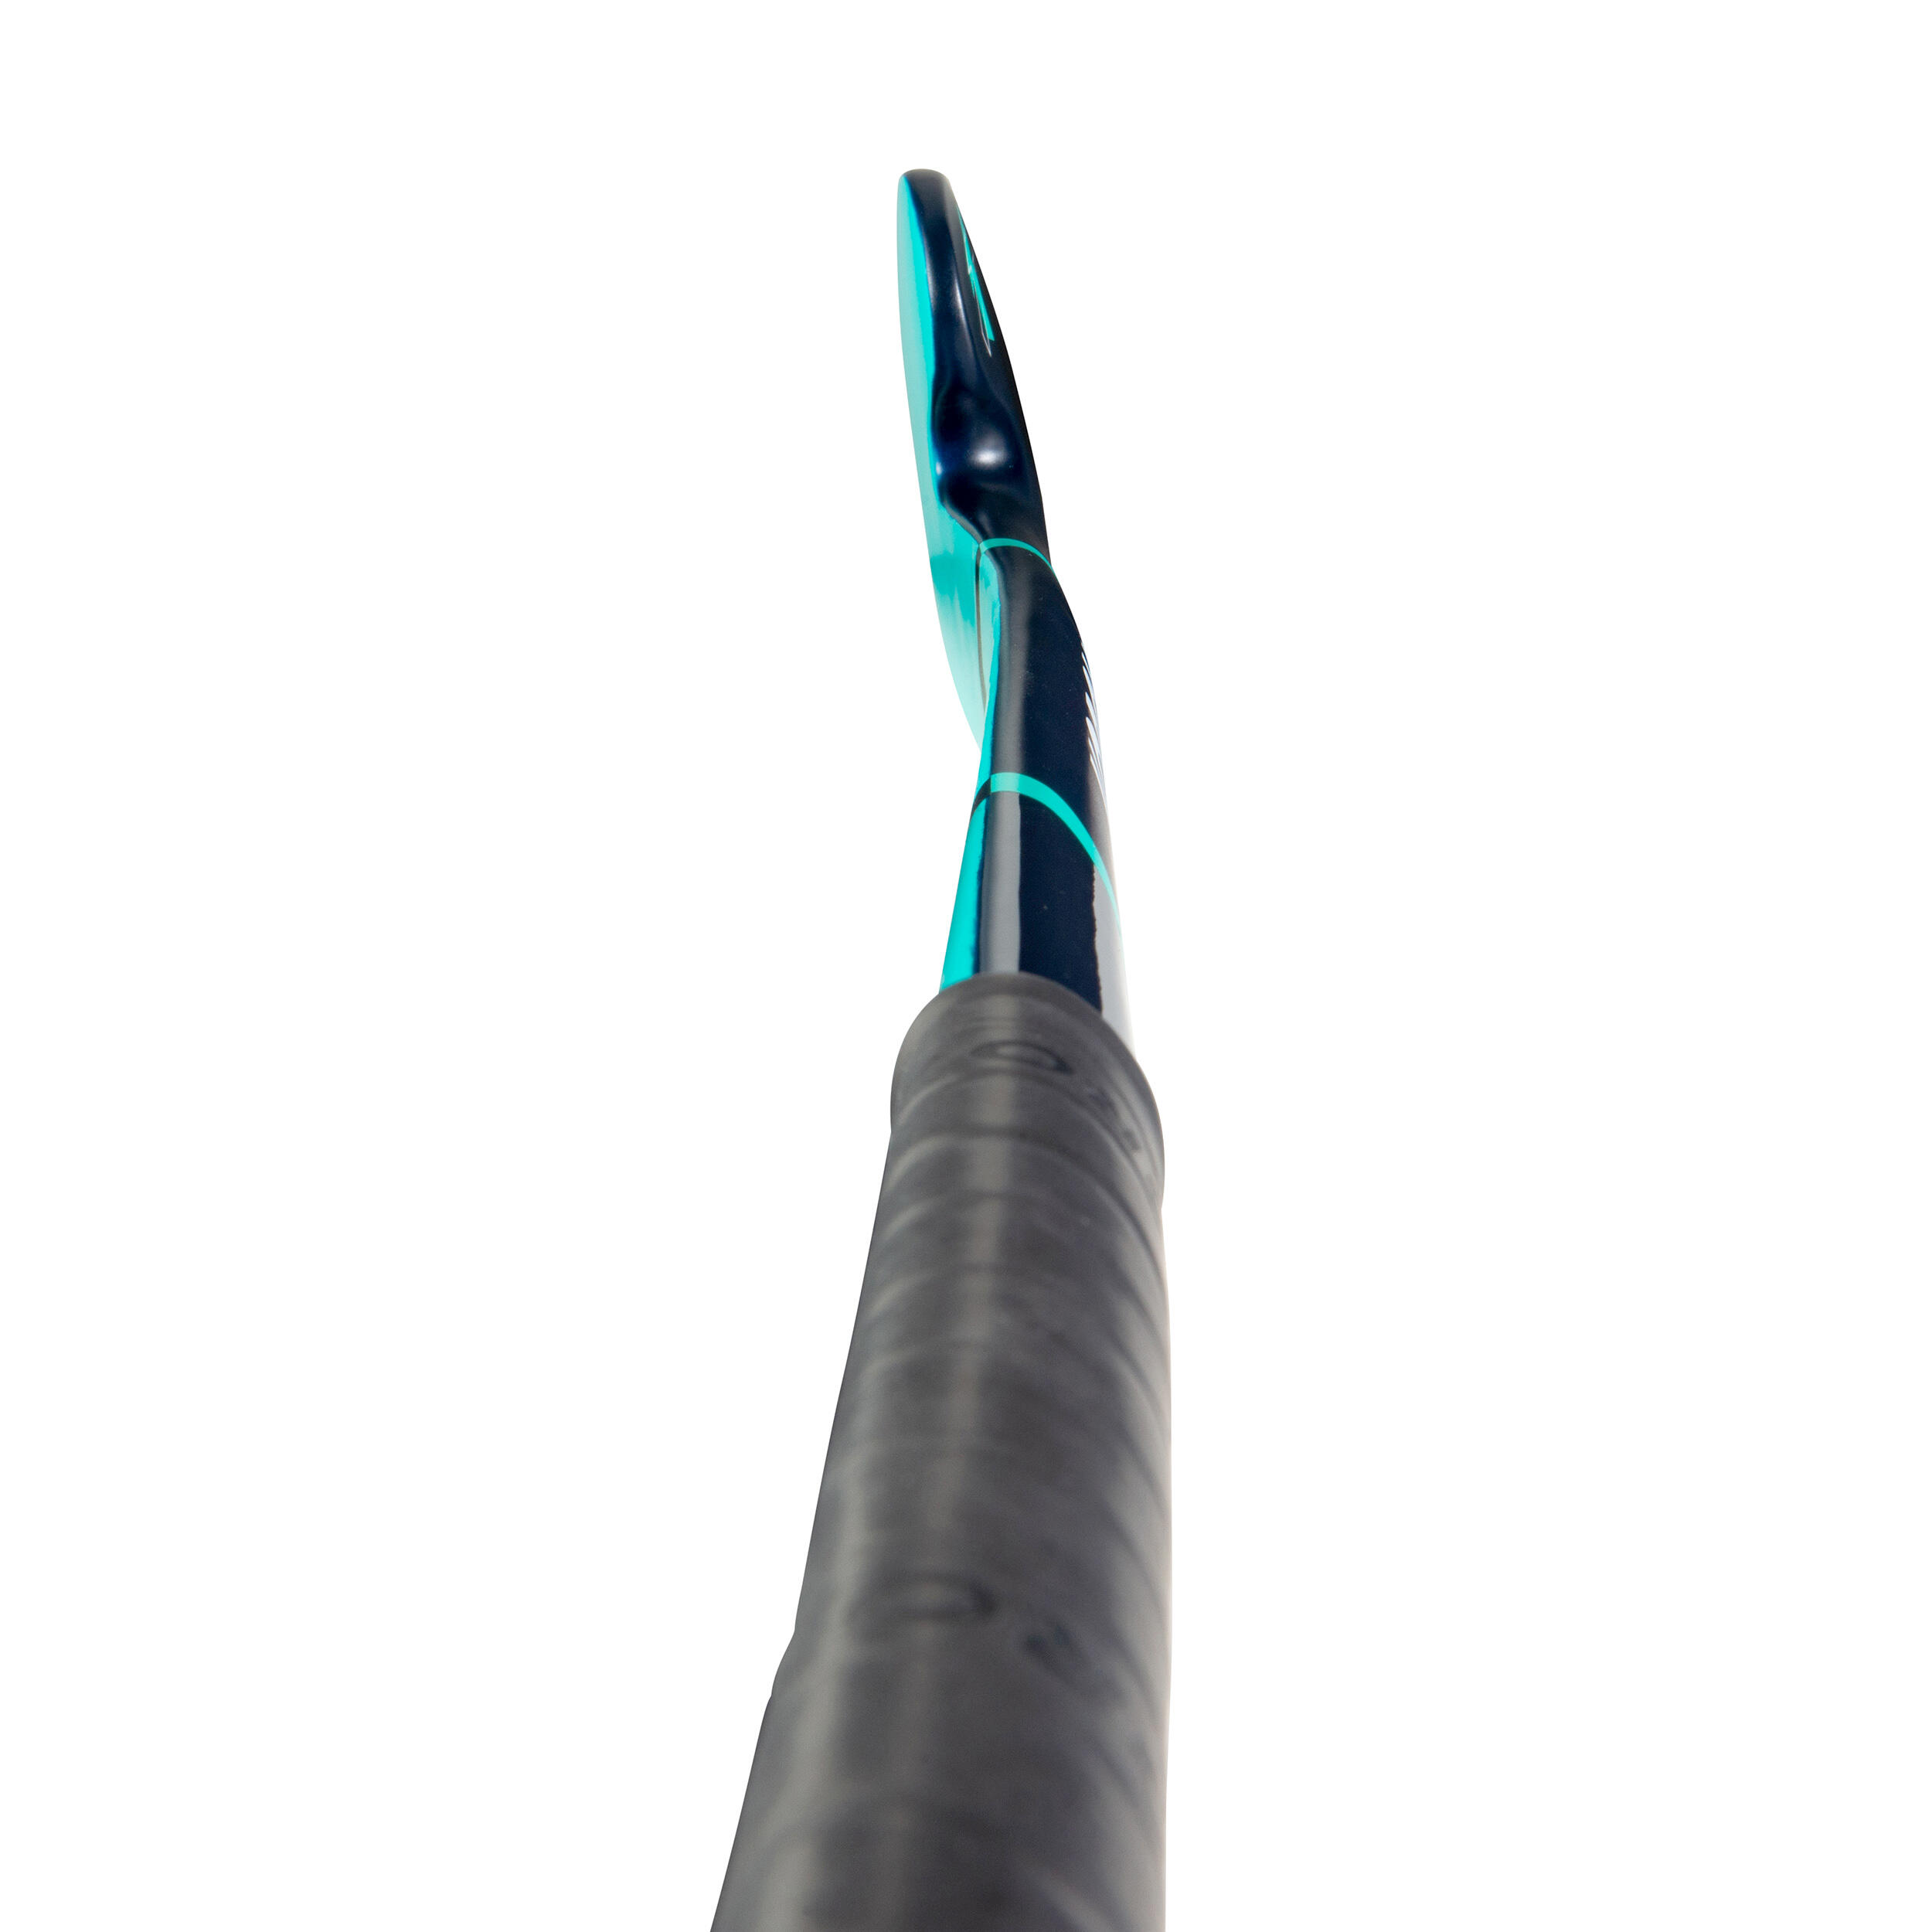 Adult Occasional Wood/Fibreglass Field Hockey Stick FH100 - Turquoise Blue 10/12